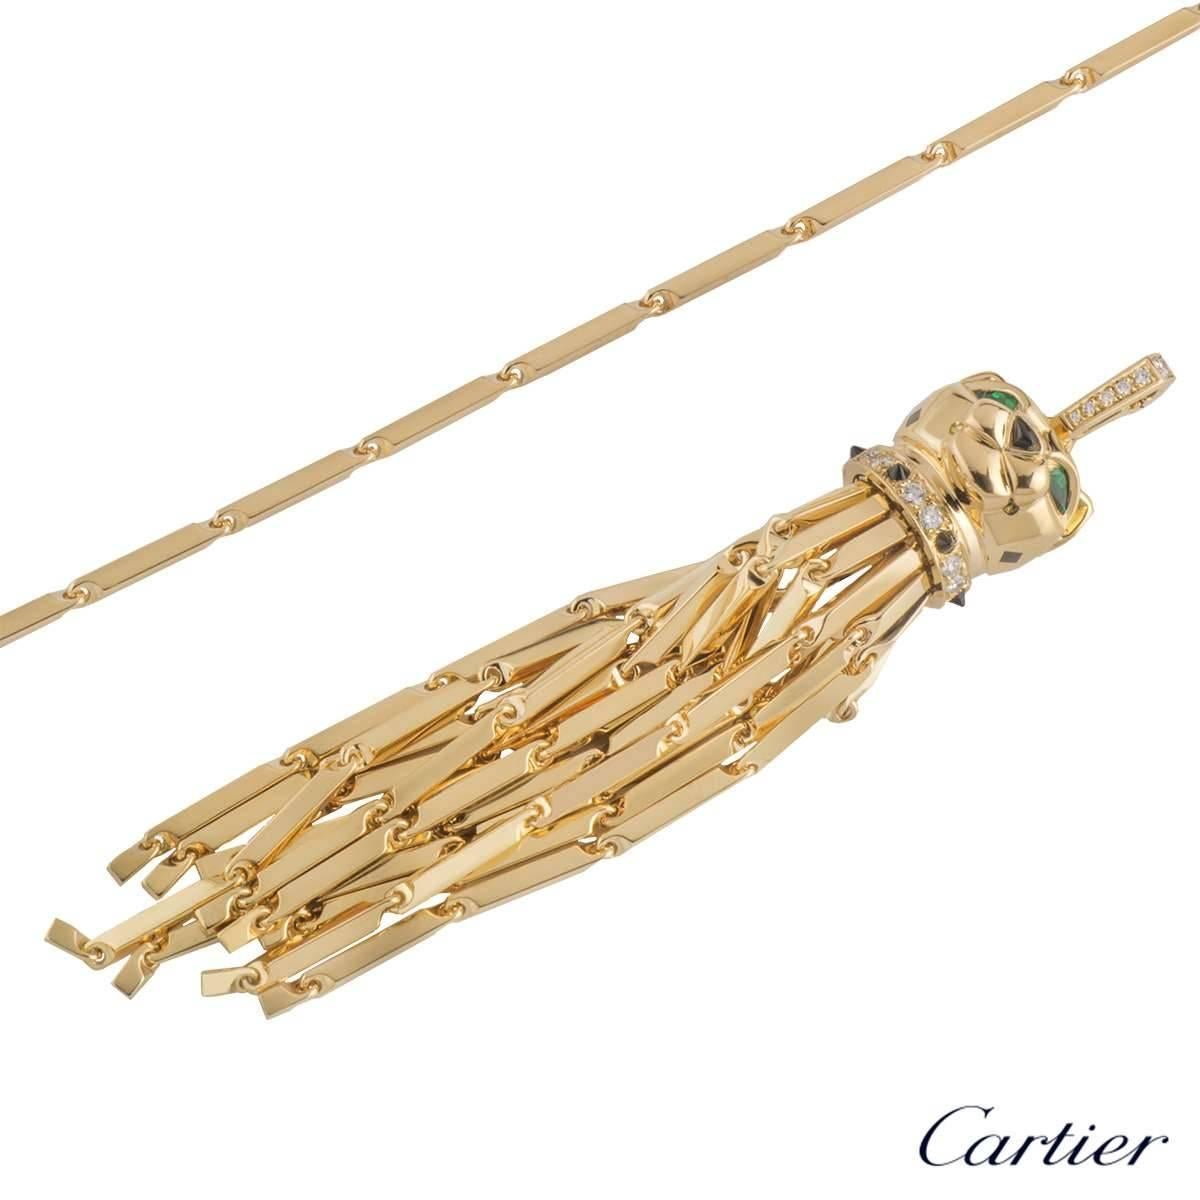 A spectacular 18k yellow gold Panthere Sautoir necklace by Cartier. The necklace features a Panthere's head, with emeralds set to the eye's and black onyx to the nose, complimented with black lacquer detailing. The necklace has diamonds set to the